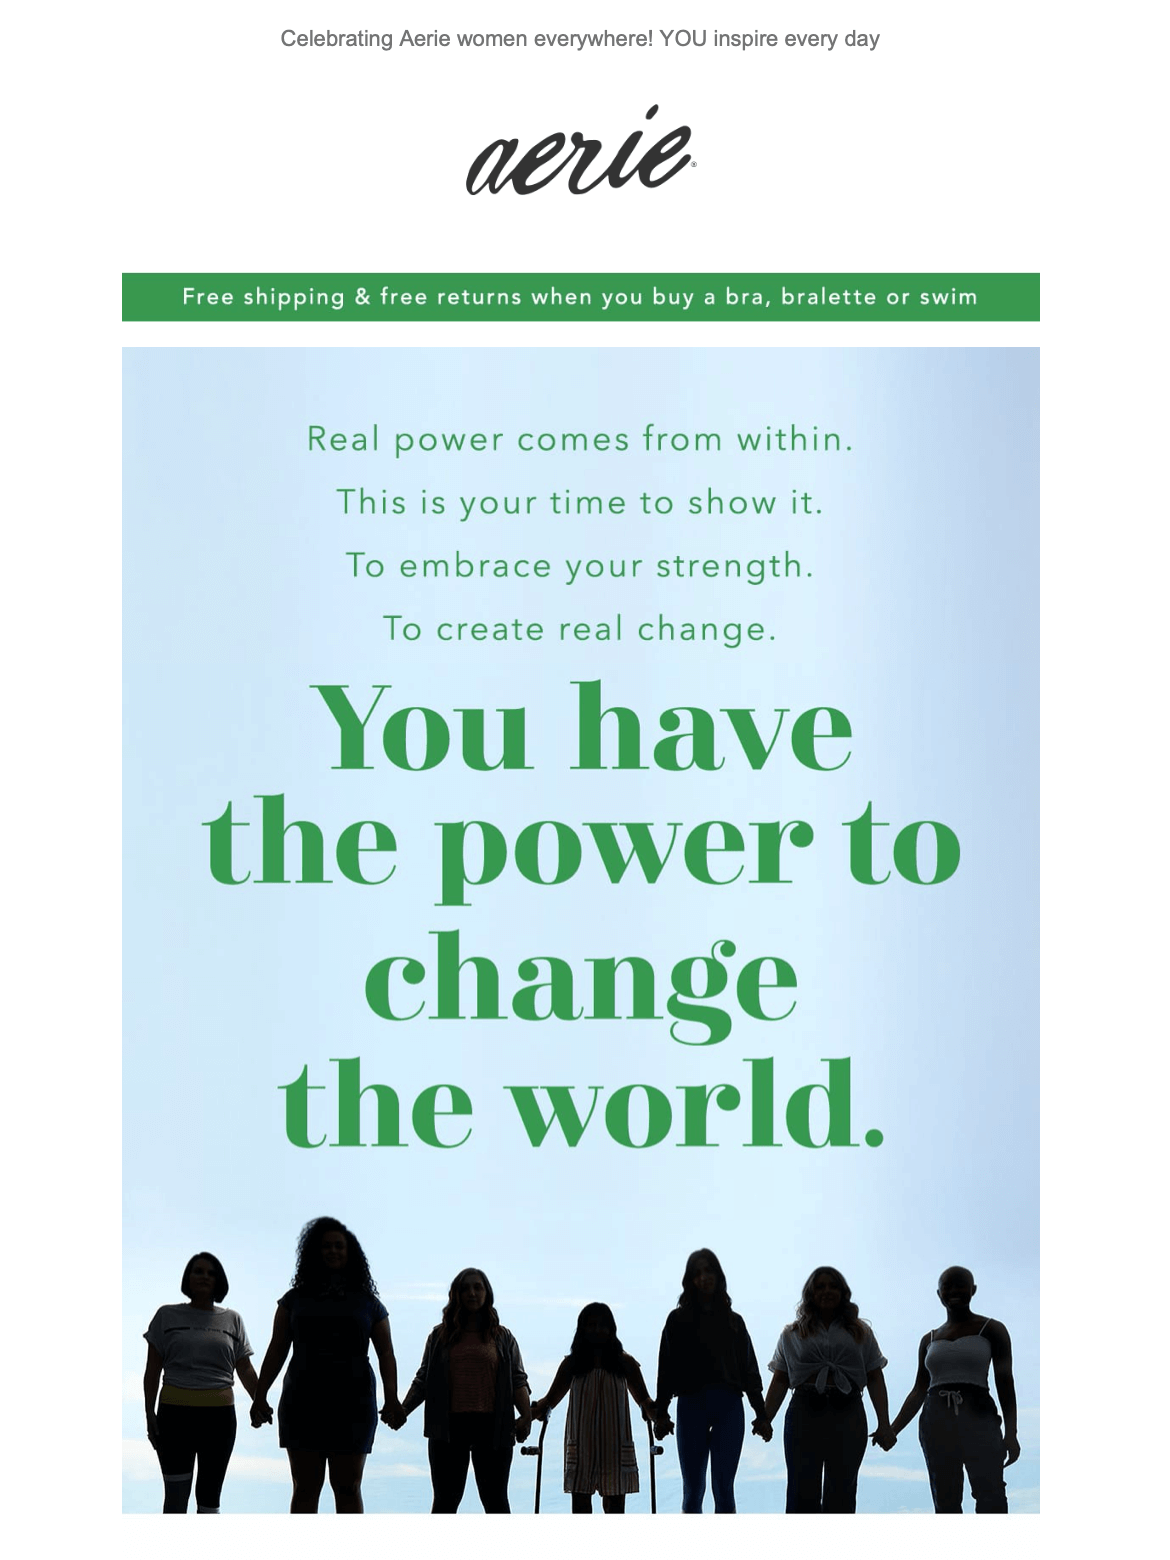 International Women’s Day Email by Aerie